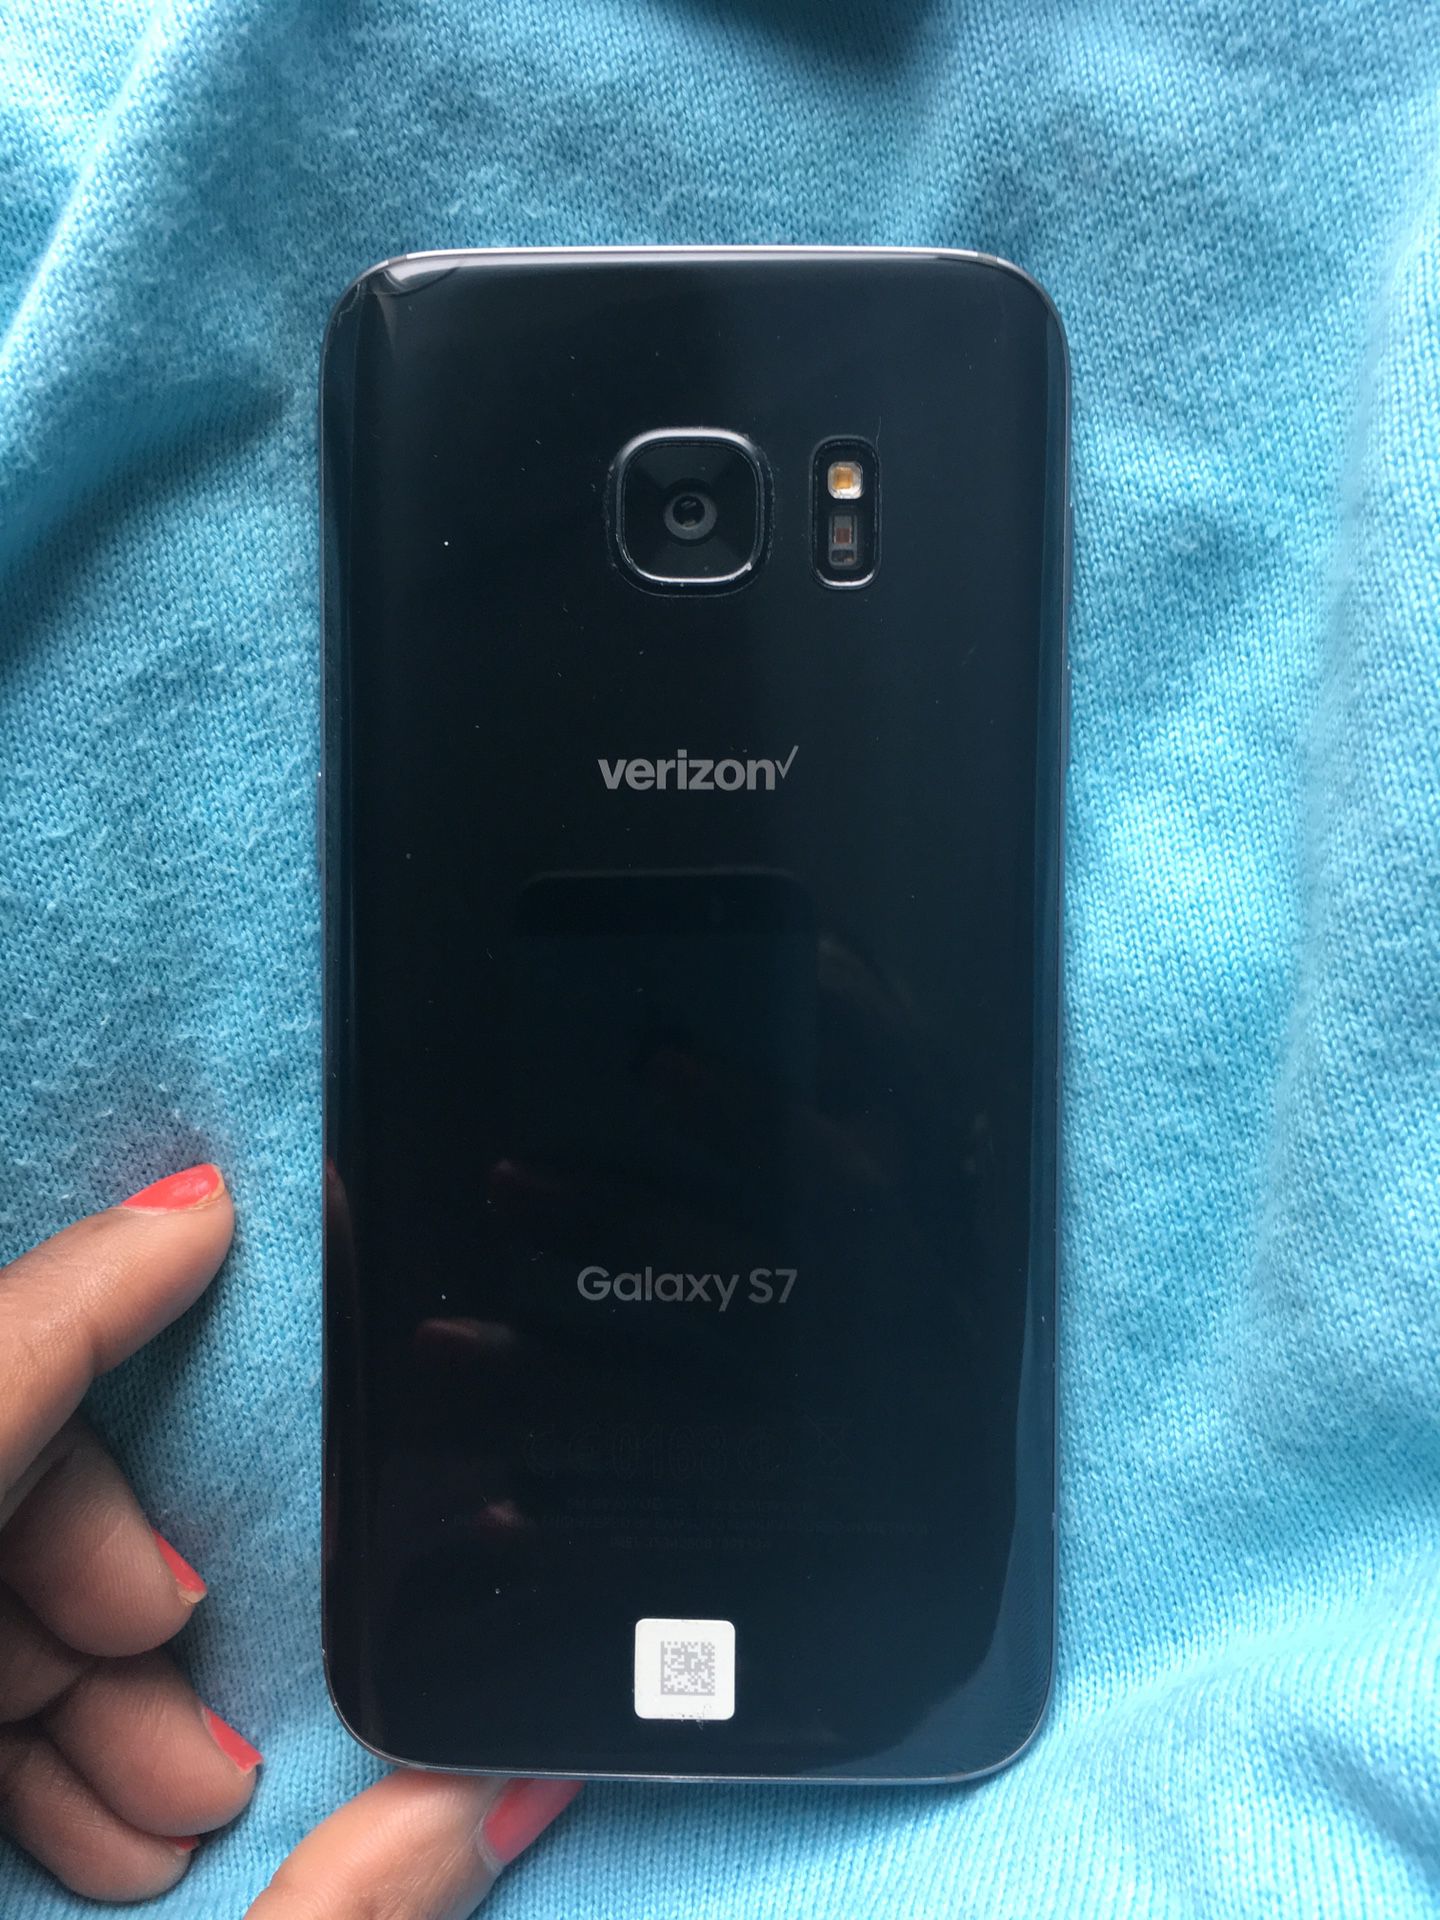 Samsung Galaxy S7 (used) with marks